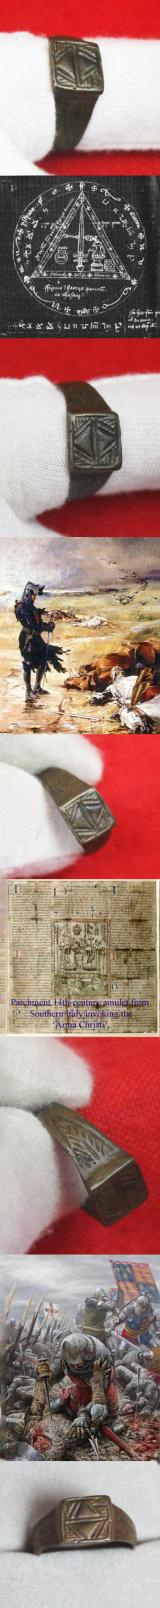 A Wondrous & Incredibly Rare 14th Century Bronze Talismanic, Magical or Mystical Knights Ring. Grand Tour Recovery From Agincourt. Featuring Twin Triangles of the Holy Trinity & the World, the Flesh, and The Devil